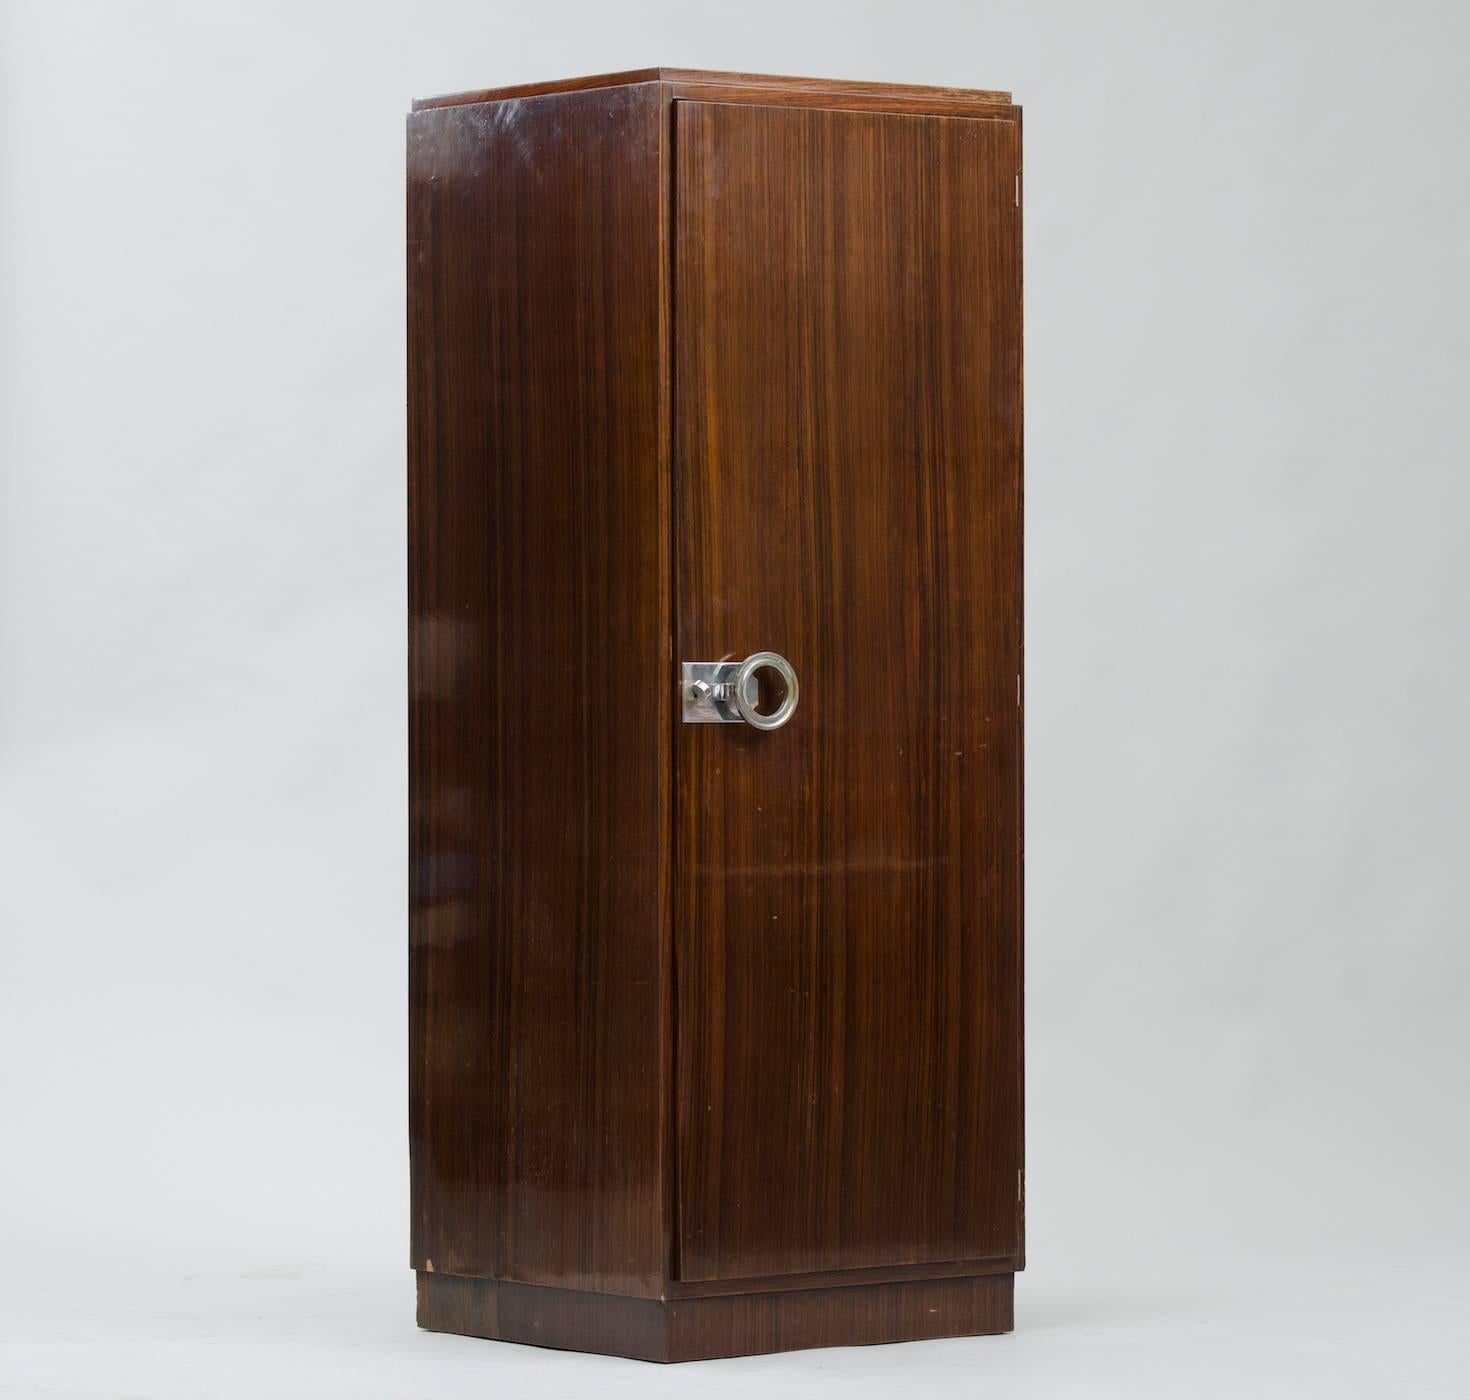 Rosewood narrow wardrobe, chrome hardware.
We have a large stock of unrestored pieces and we decided to publish it, the price shown is in the original condition.
We have our own workshop and we can restore these items, including upholstery and all